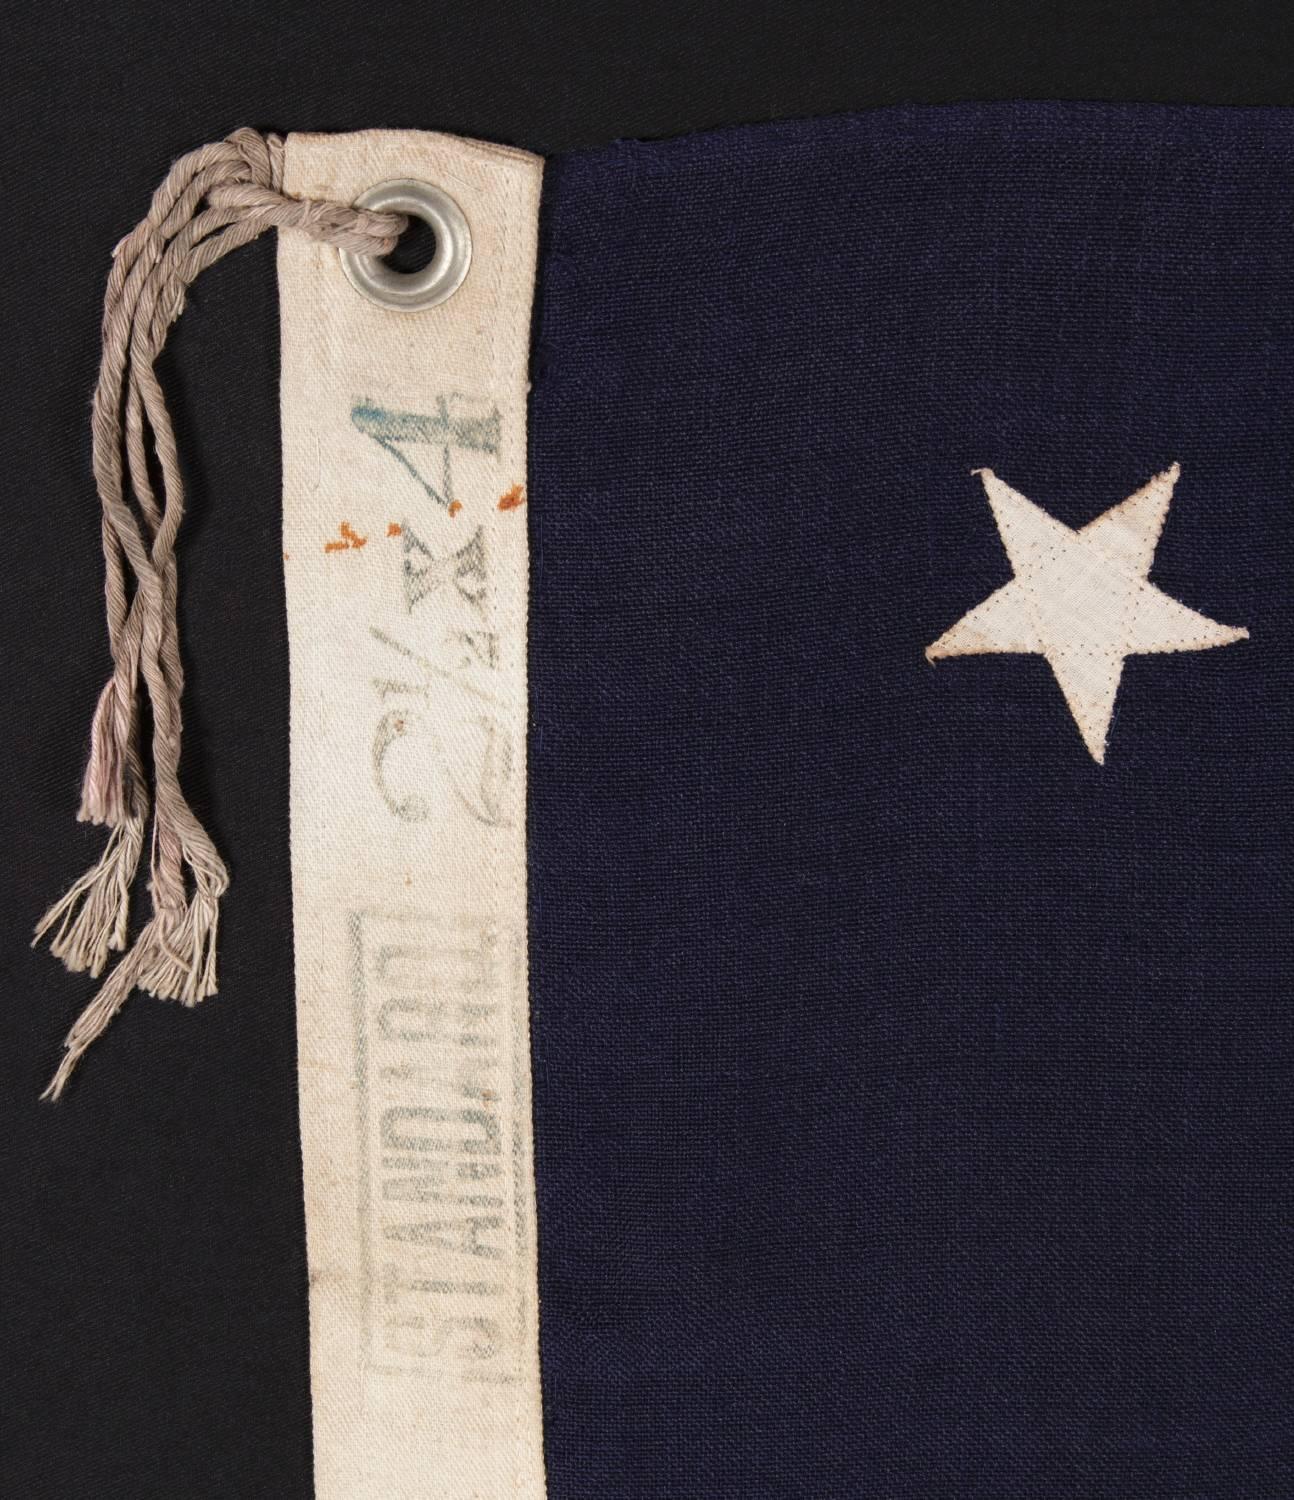 19th Century 13 Stars Arranged in a Medallion Pattern on a Small-Scale Flag